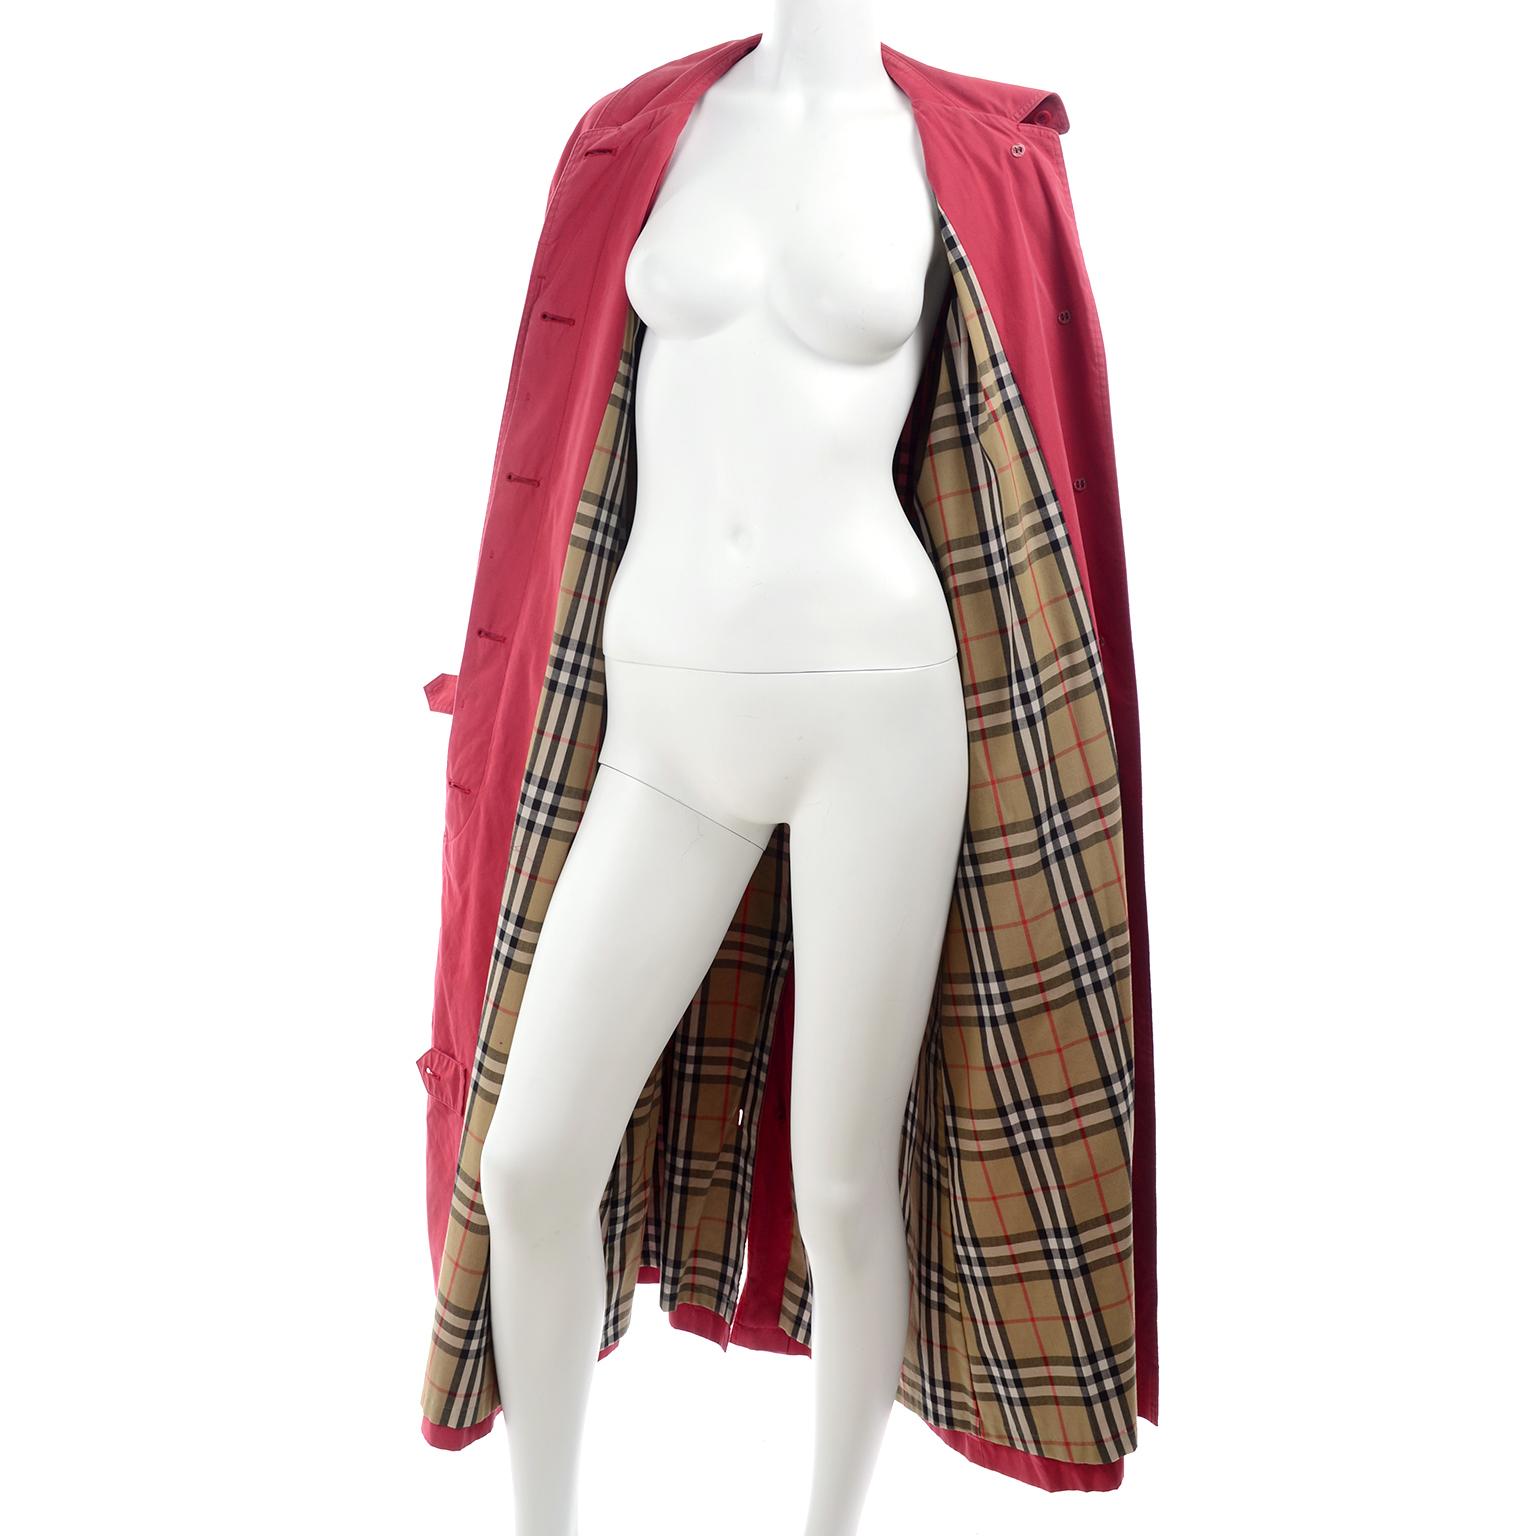 This great vintage Burberrys of London trench coat is in a raspberry pink red fabric lined with the classic red, tan, and black Haymarket Check tartan plaid Burberry print. Front button closure with a small slit in the back with a button closure as